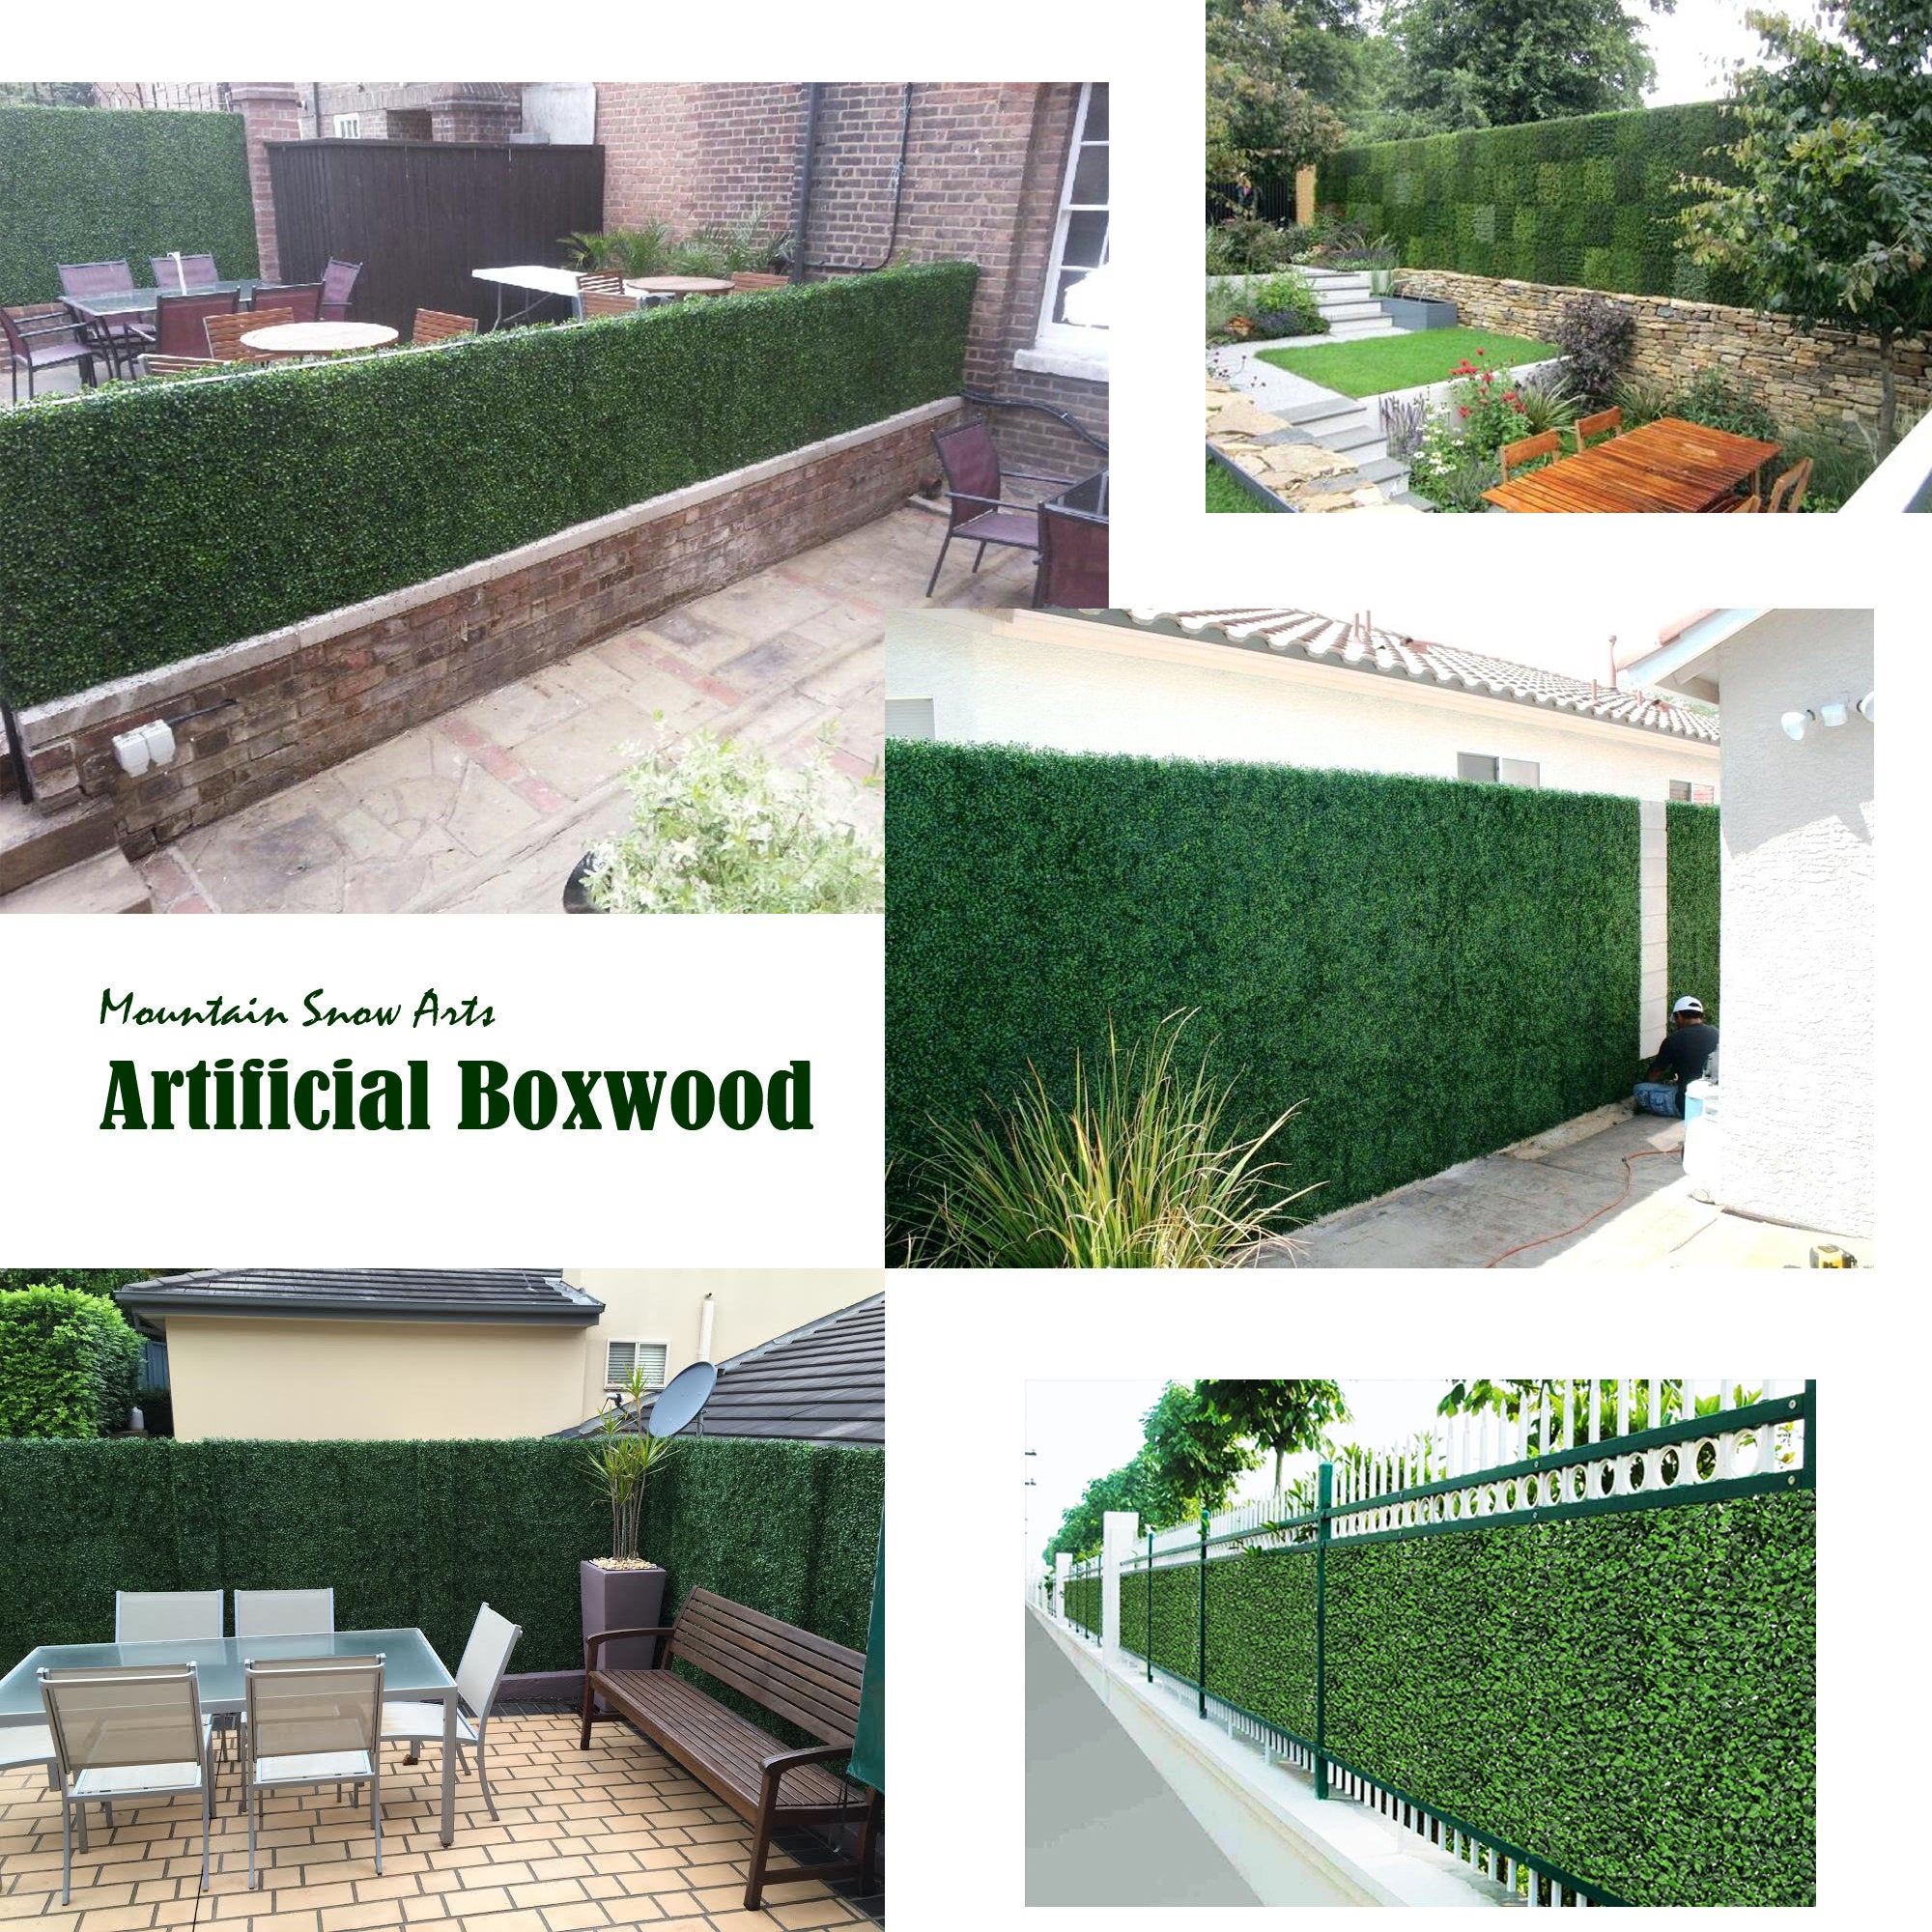 Artificial Boxwood Panels Topiary Hedge Plant UV Protected Privacy Screen Outdoor Indoor Use Garden Fence Home Decor 20x20" DarkGreen 60pc